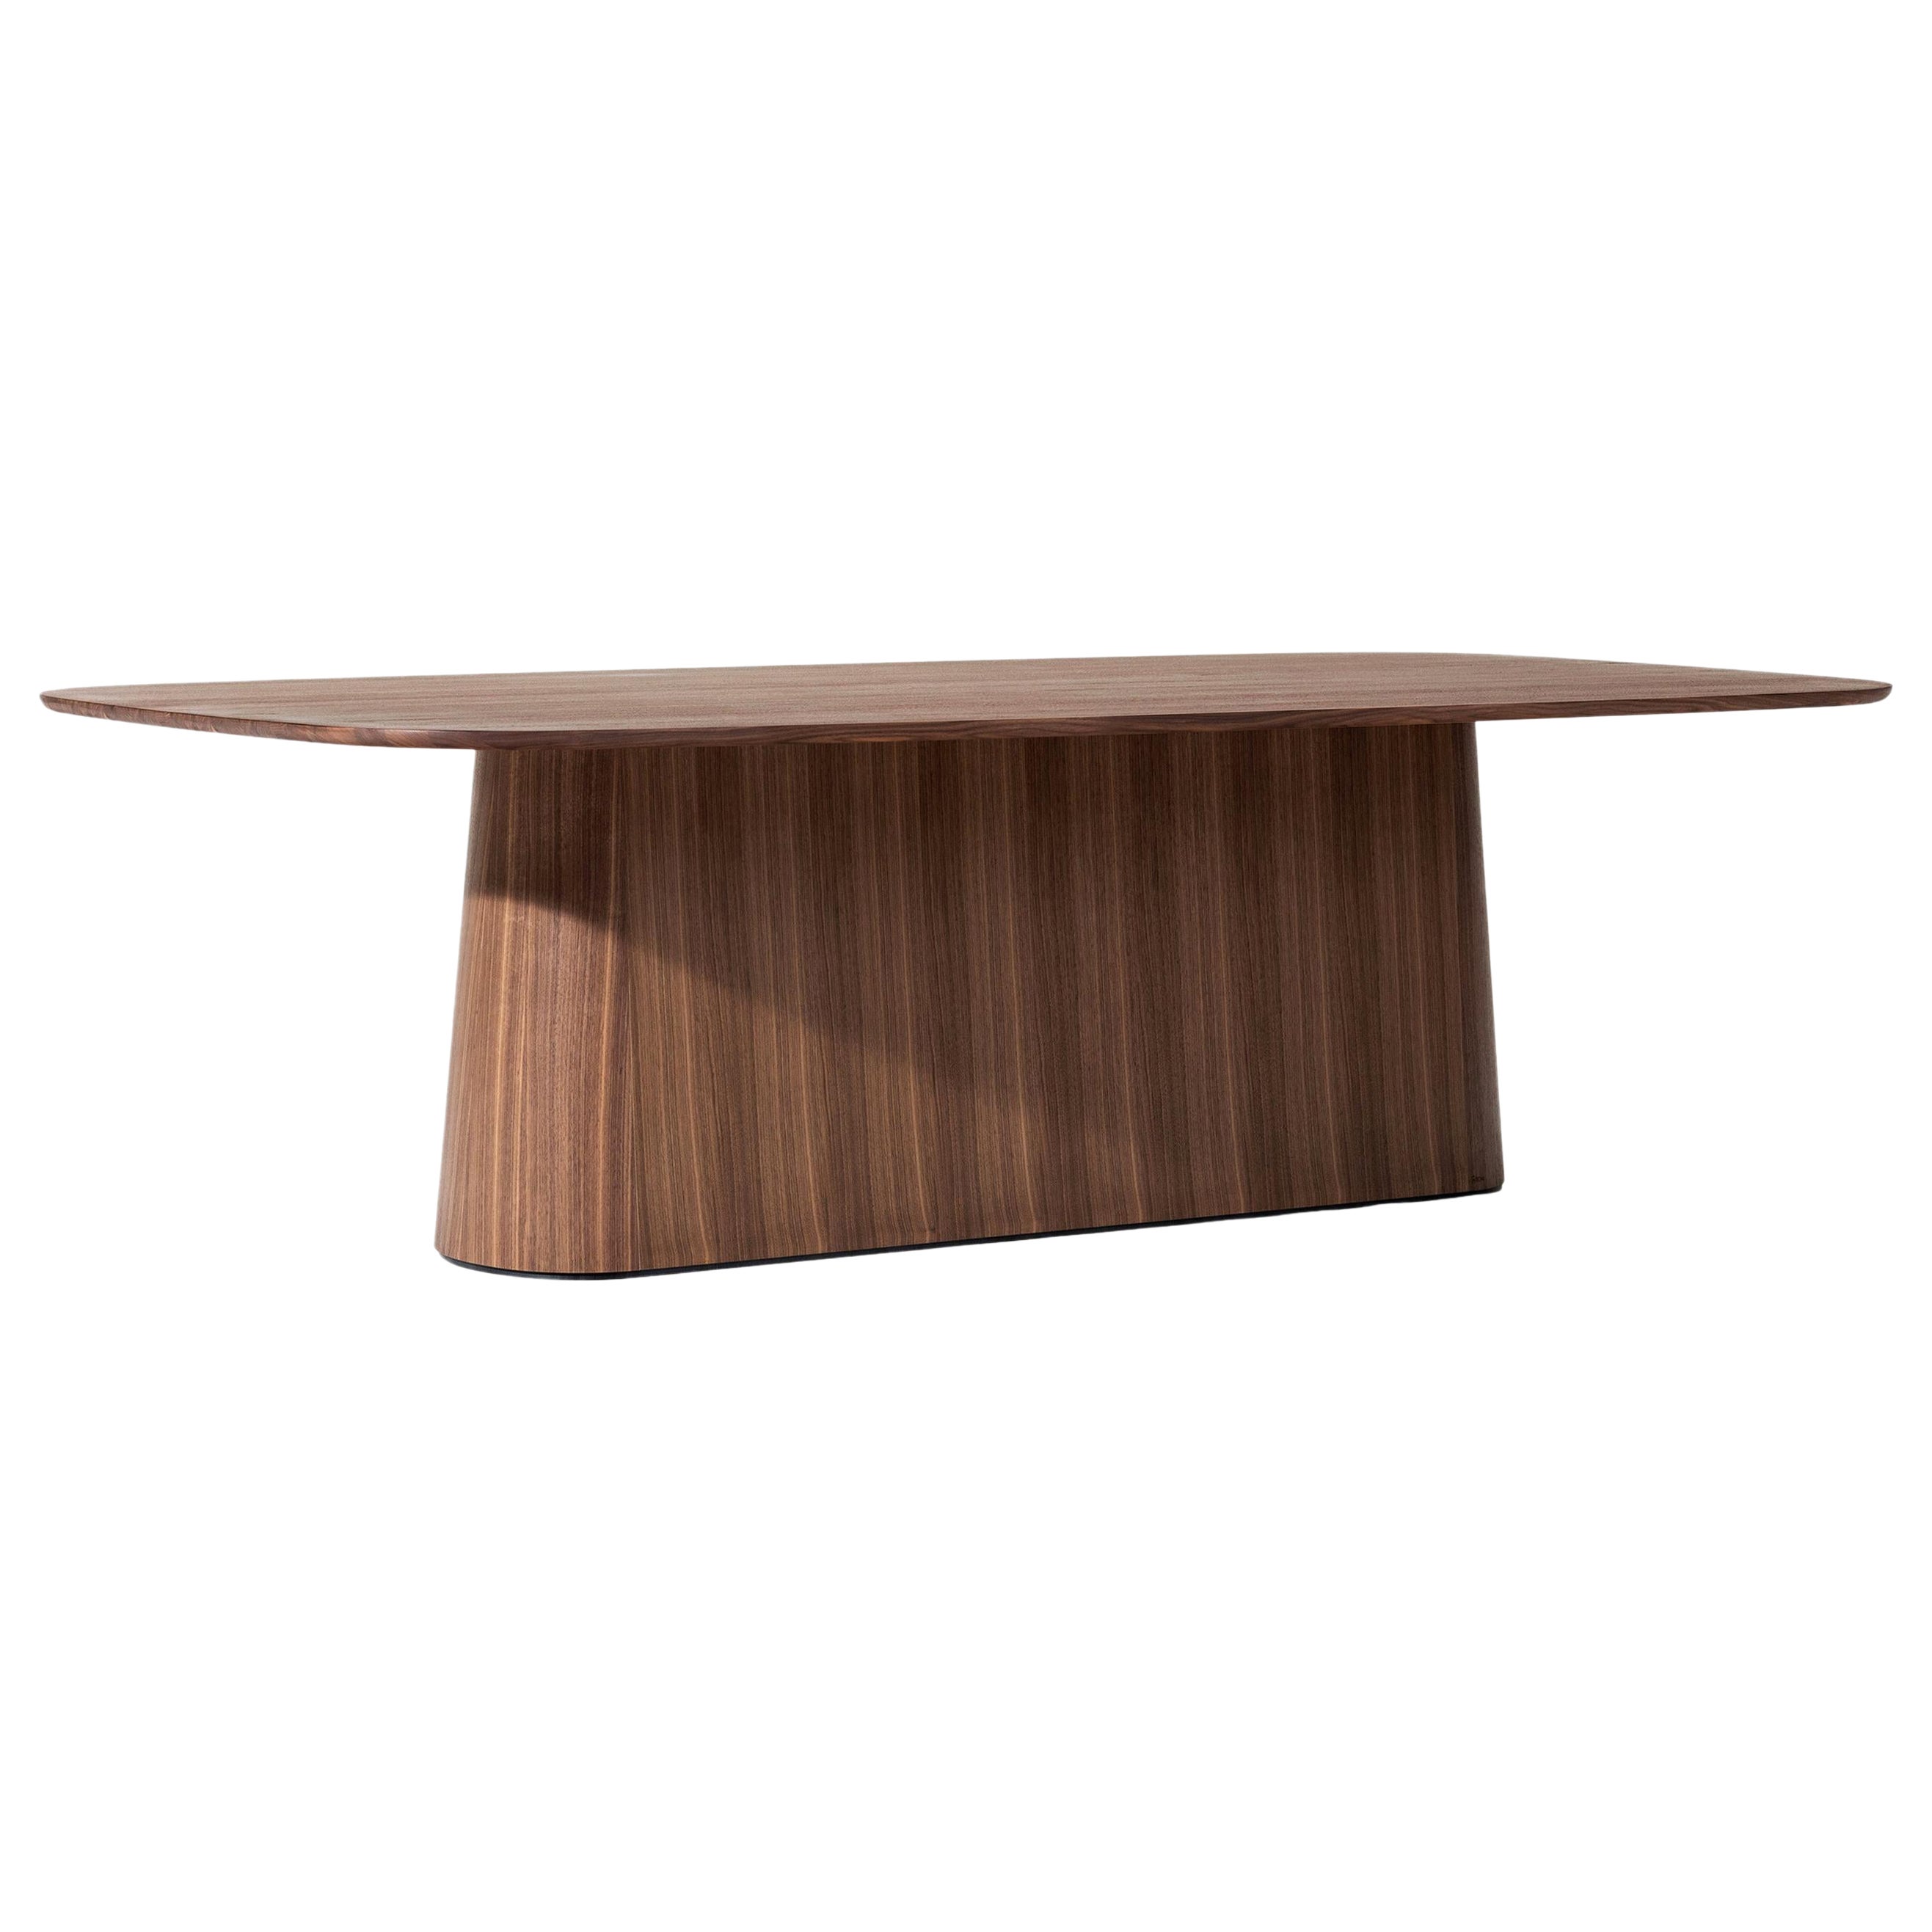 Contemporary Dining Table POV 467, Solid Oak or Walnut, 280 For Sale